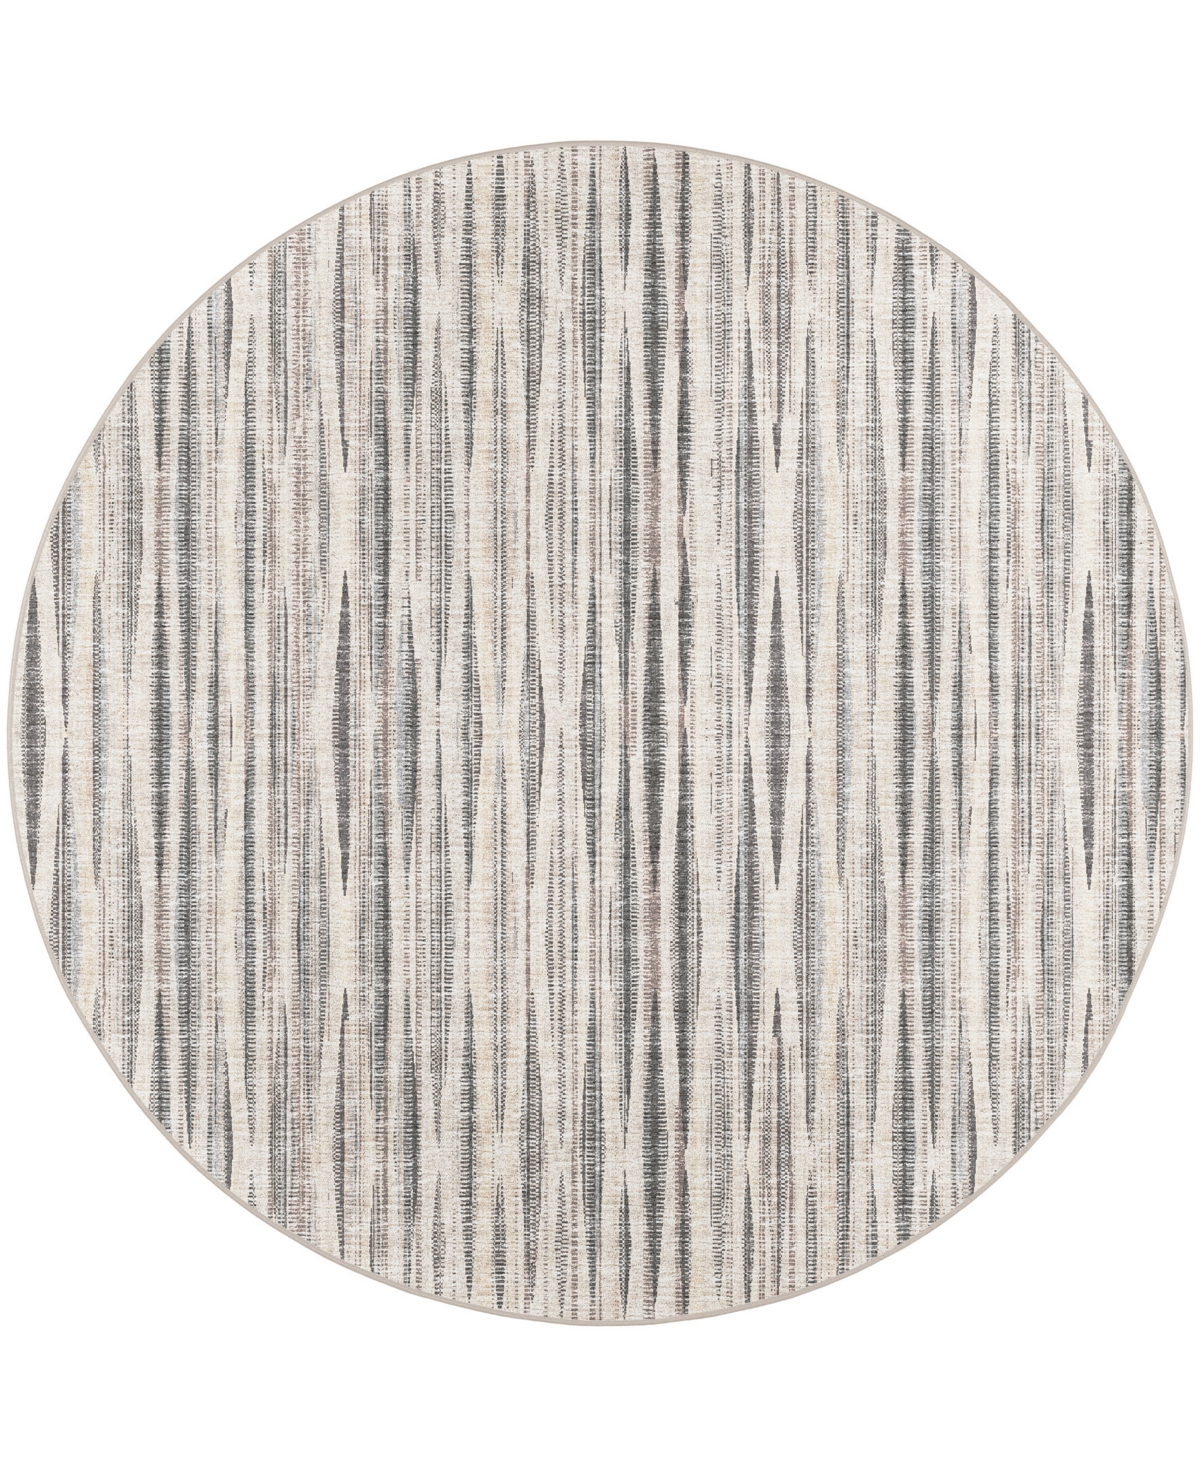 D Style Sutter Stt-1 10' x 10' Round Area Rug - Ivory